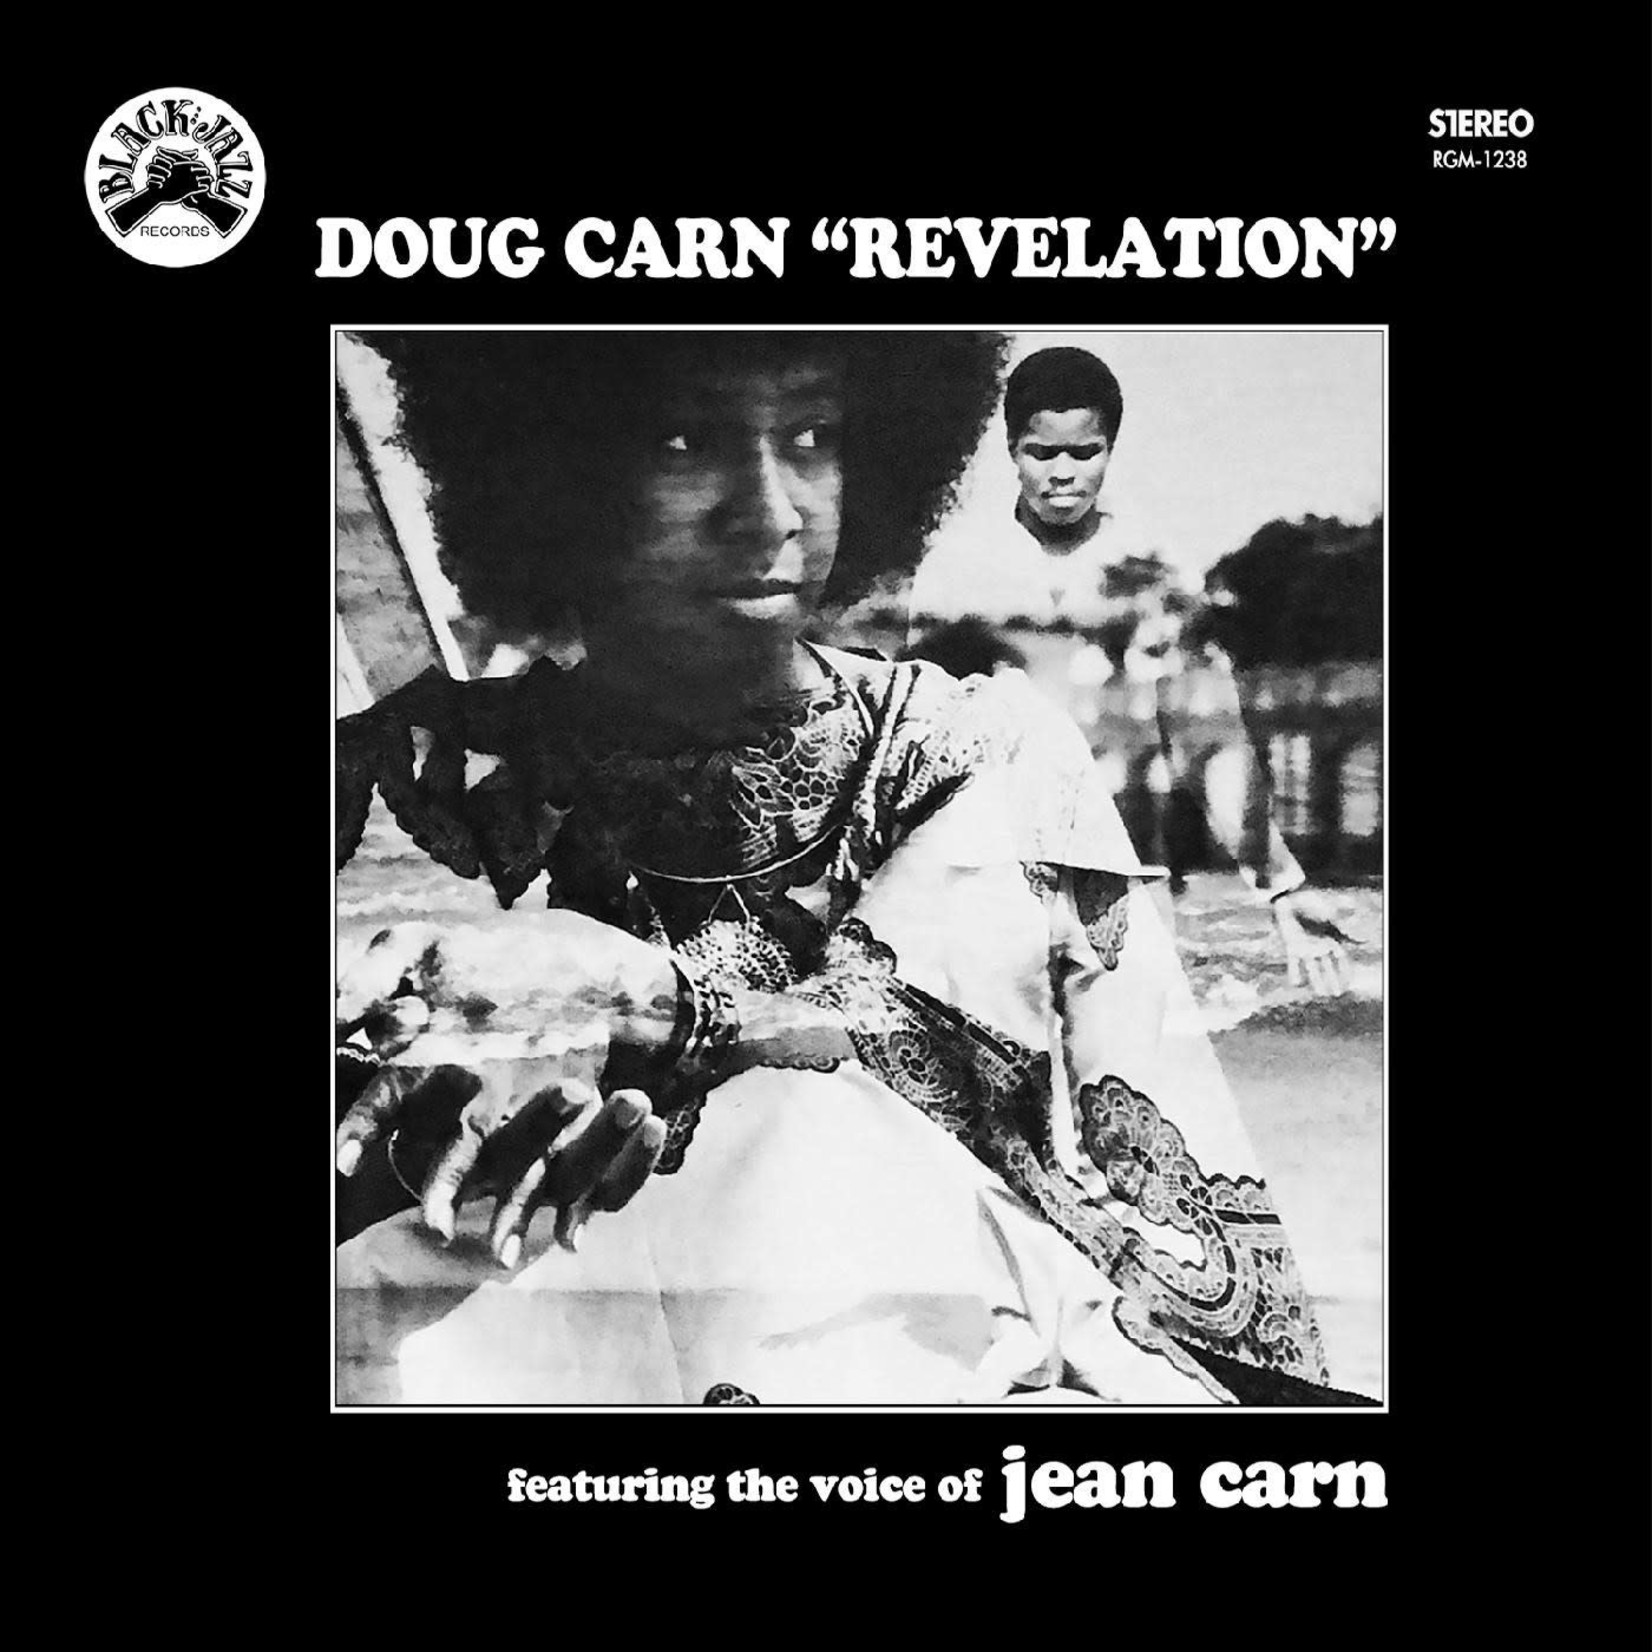 [New] Carn, Doug Featuring the Voice of Jean Carn: Revelation (remastered vinyl edition) [REAL GONE MUSIC]